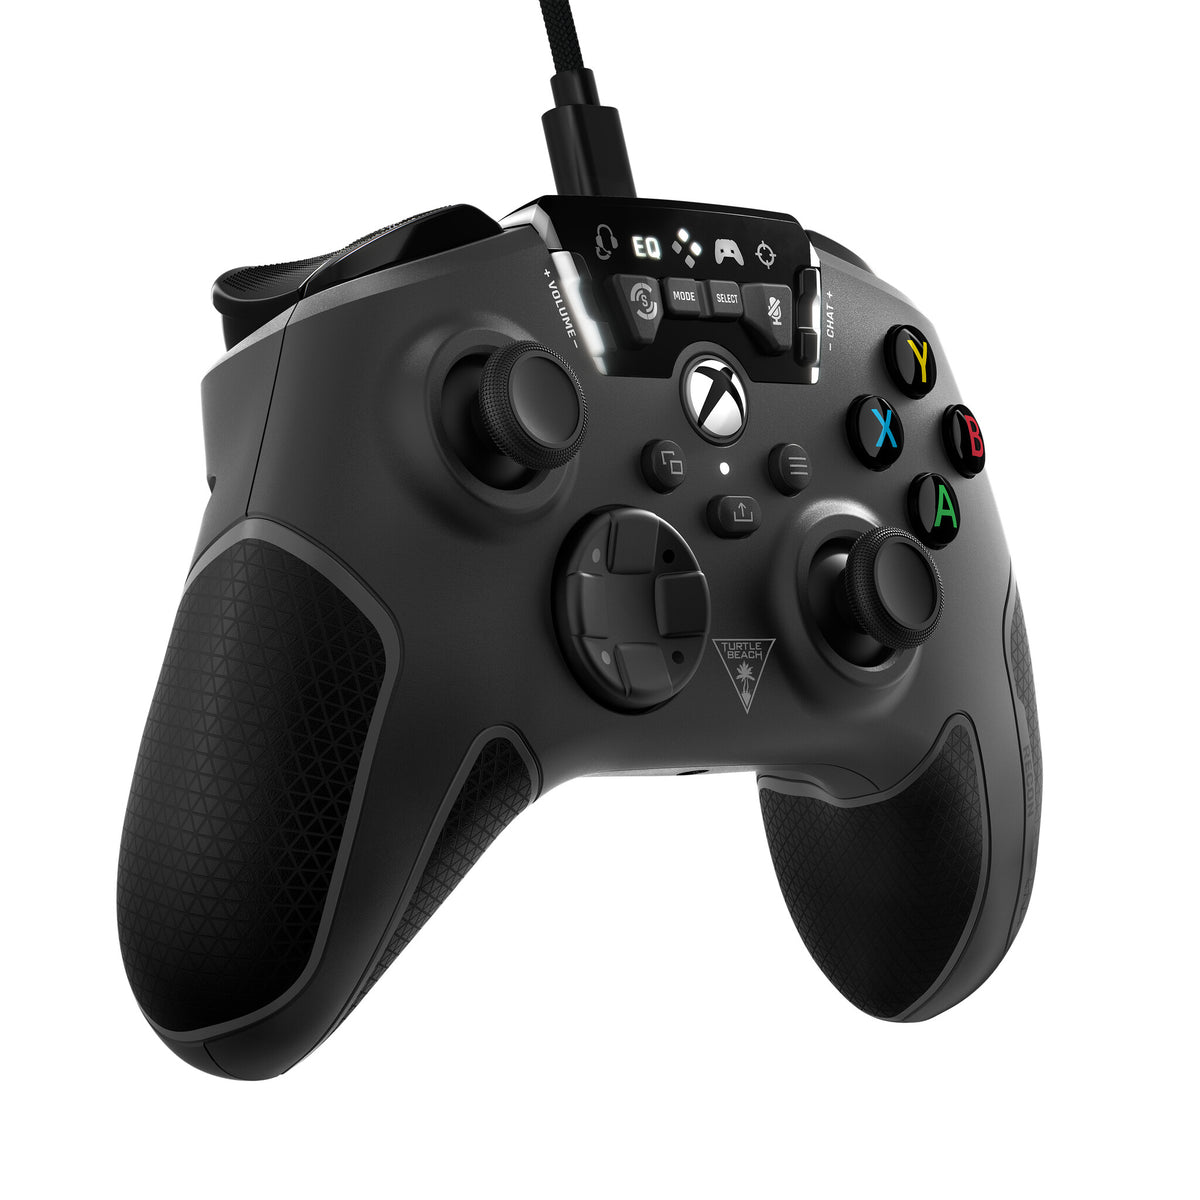 Turtle Beach Recon - USB Wired Gamepad for PC / Xbox Series X|S in Black